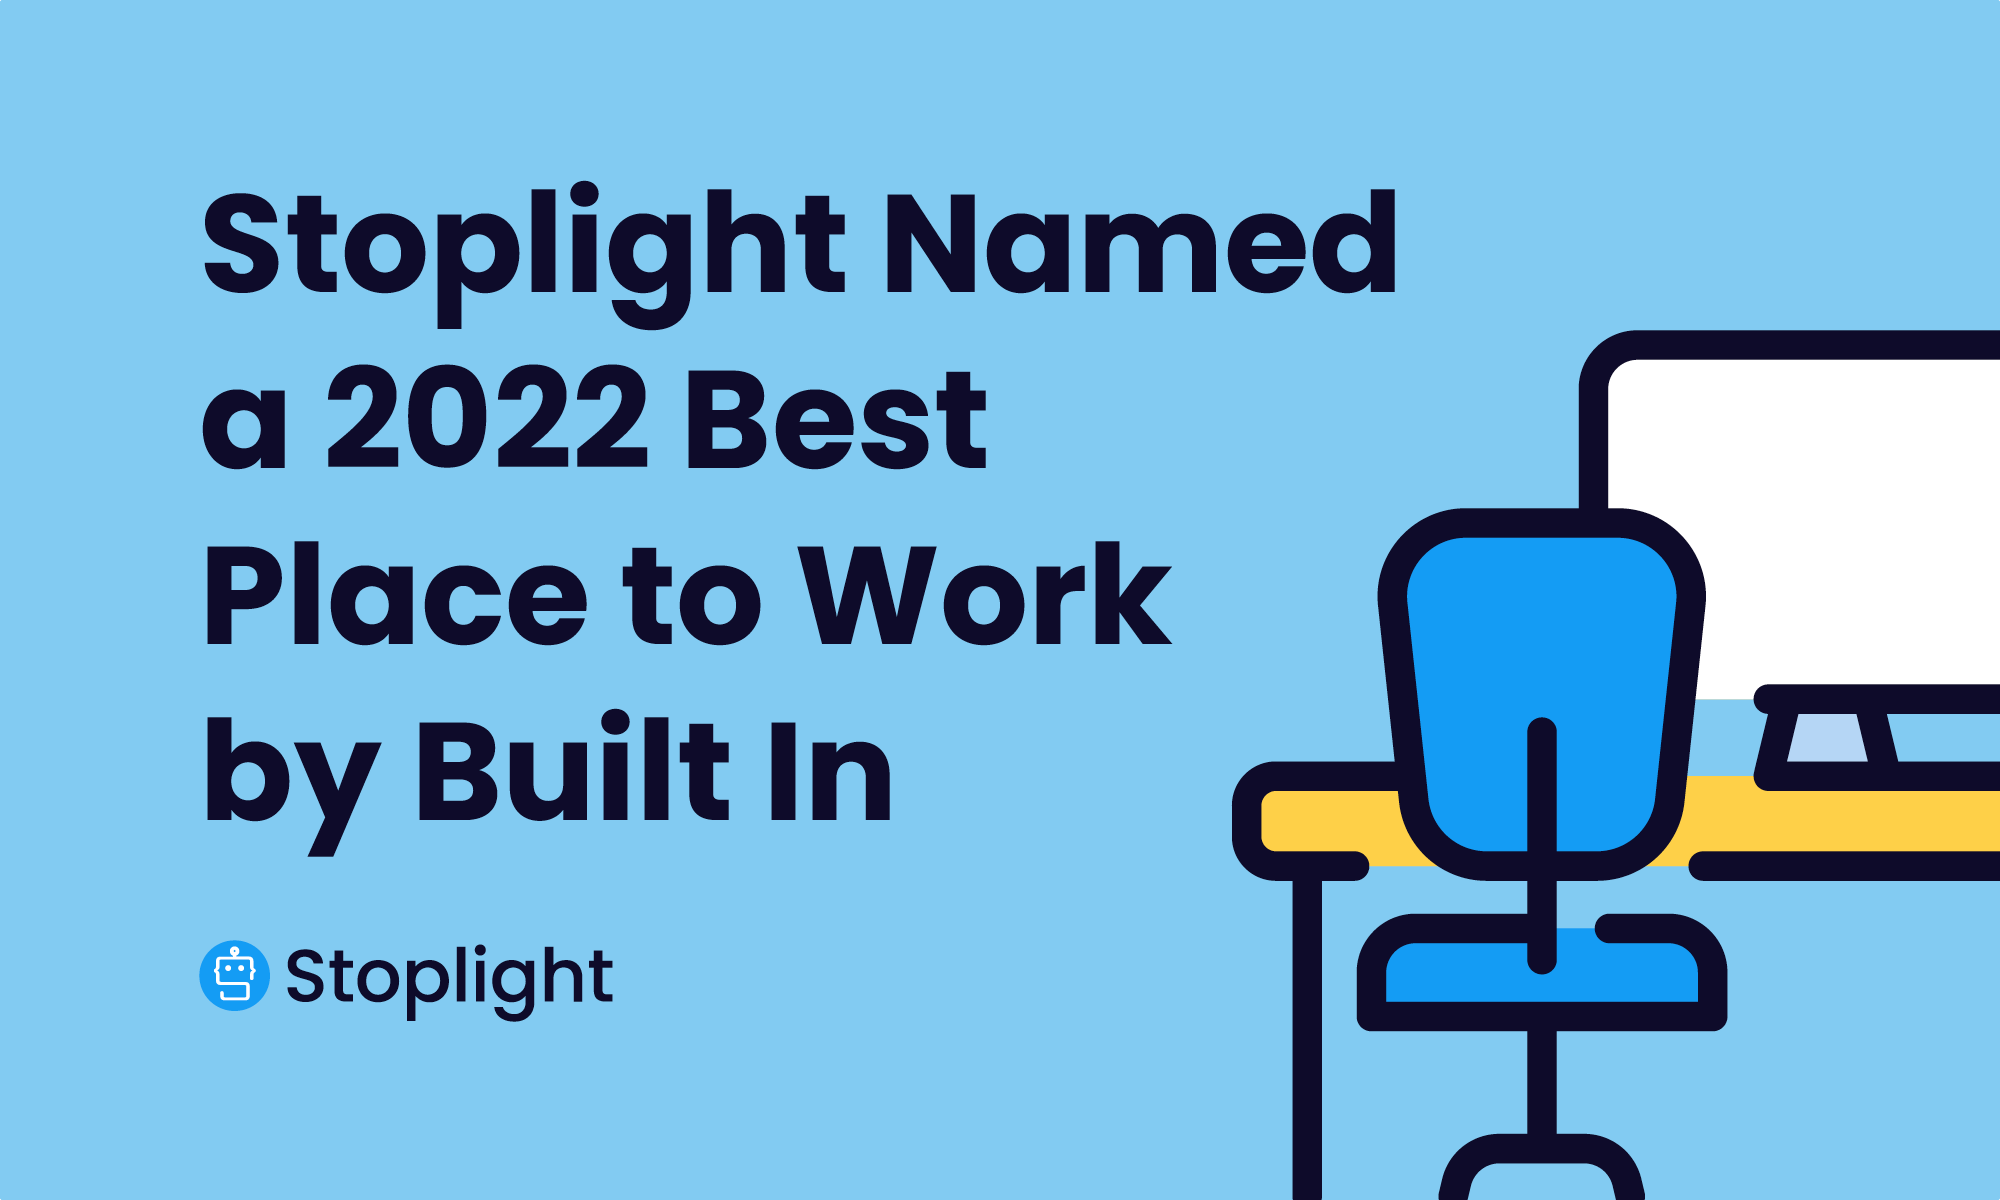 Stoplight Named a 2022 Best Place to Work by Built In